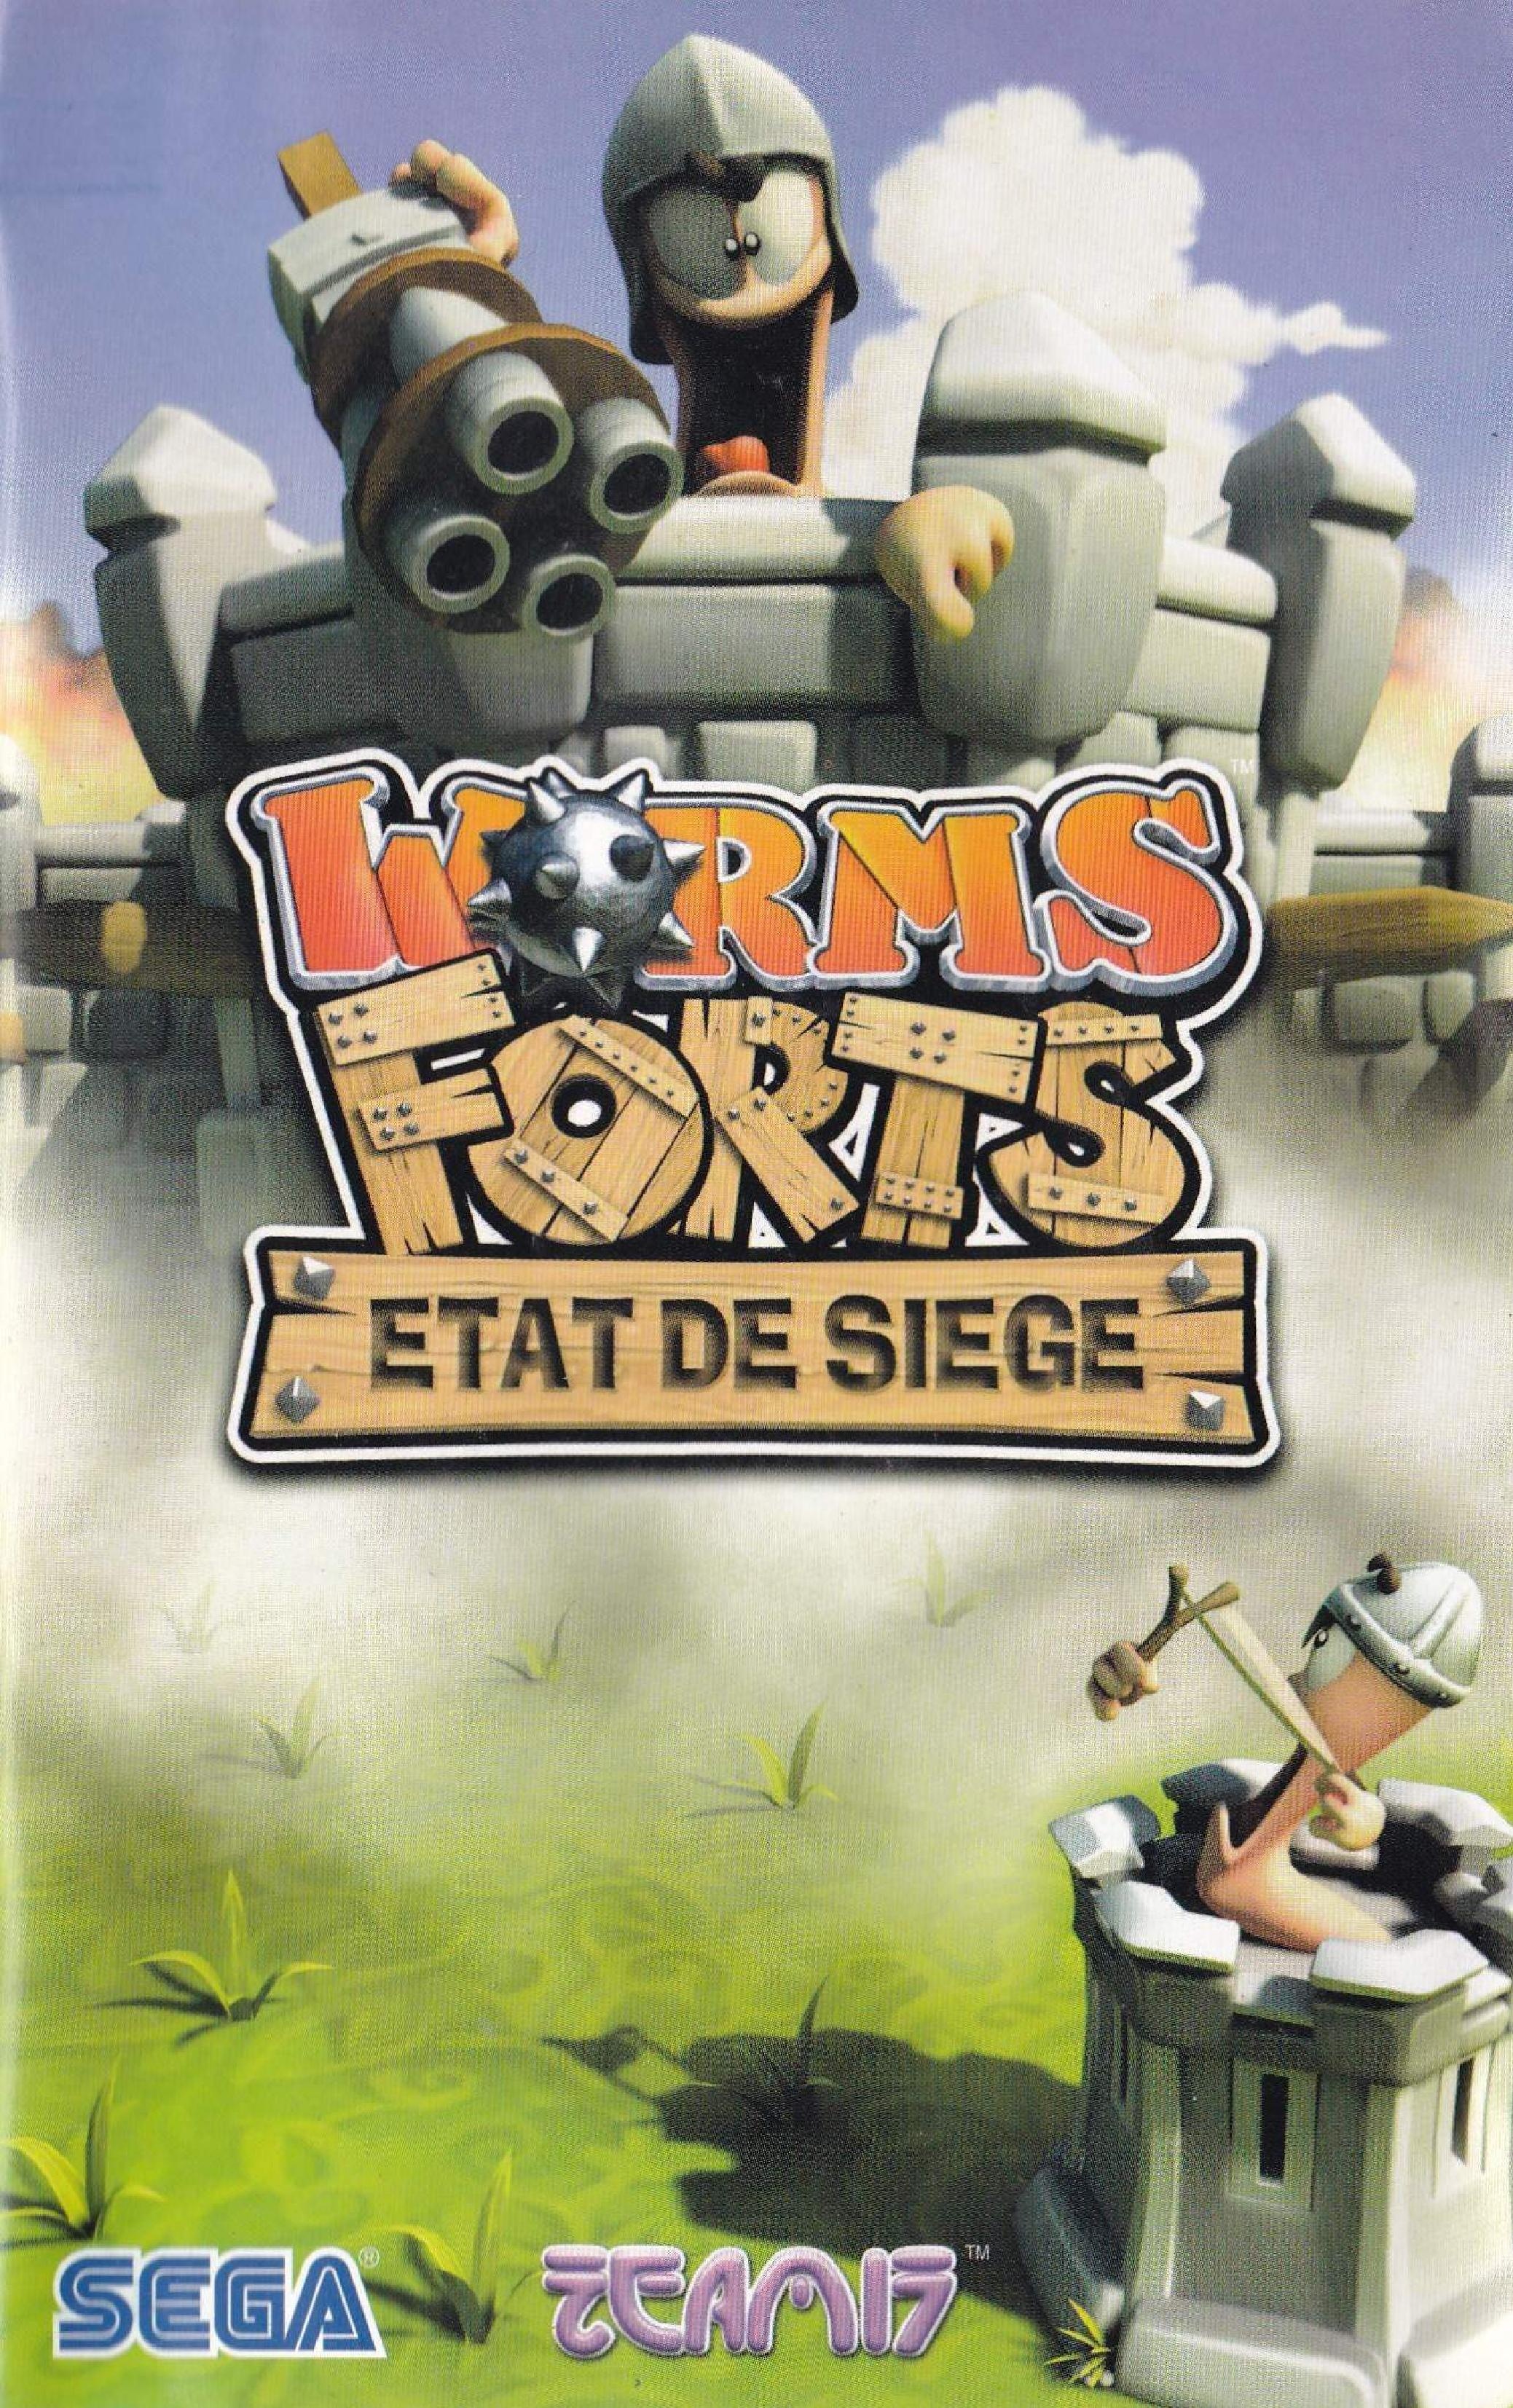 Worms Forts PS2 FR Manual.pdf